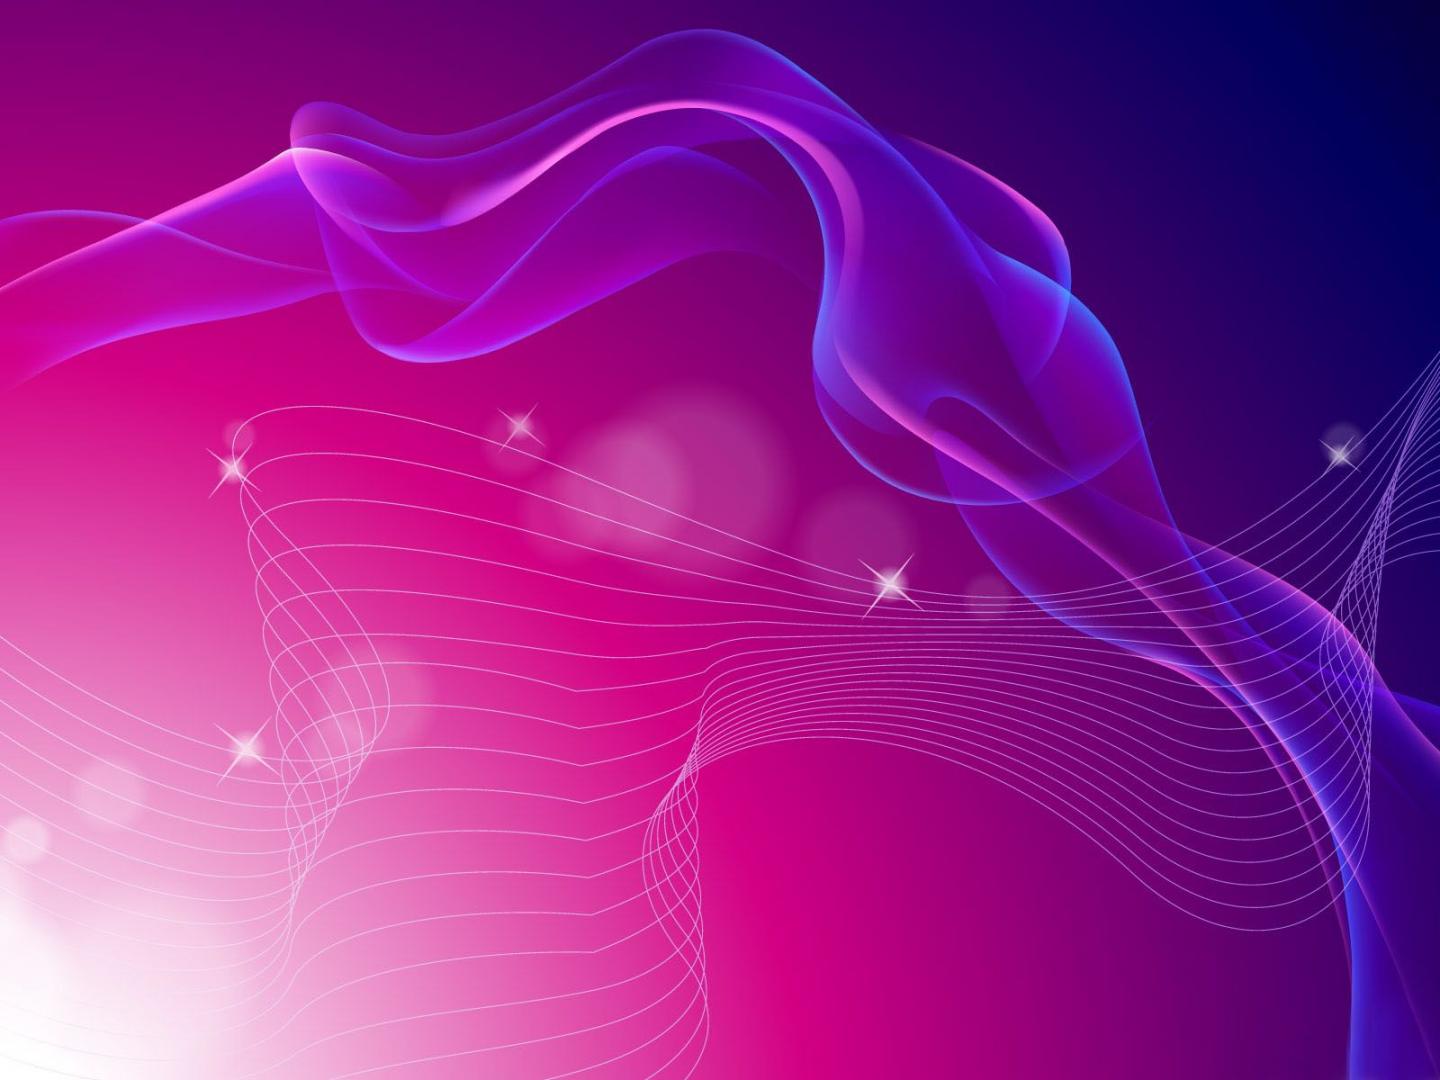 Pink And Purple Abstract backgrounds 1280 1024 Aero Pink And Purple